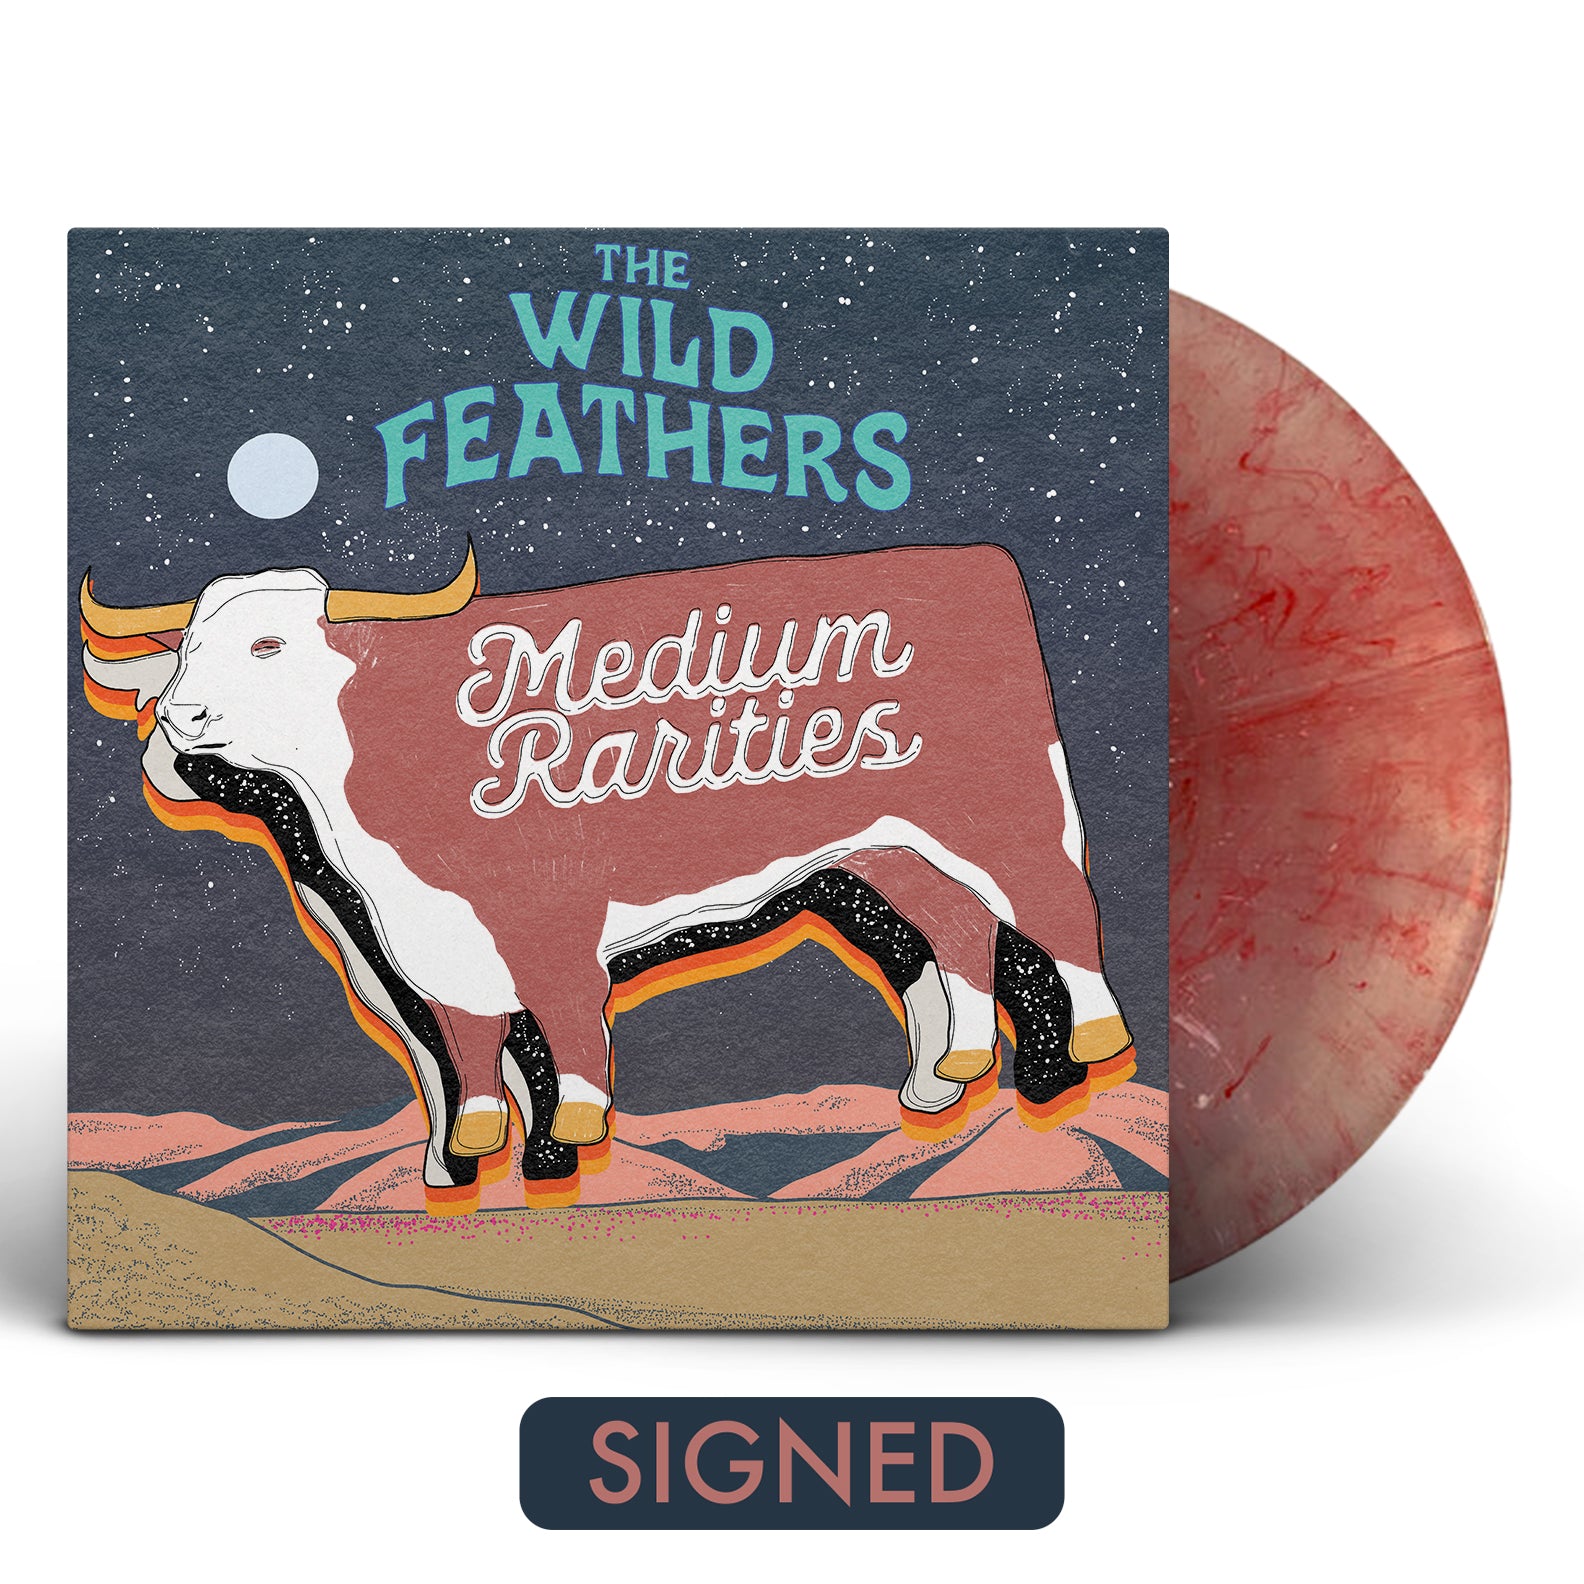 The Wild Feathers - Medium Rarities [SIGNED Deluxe Color Vinyl]